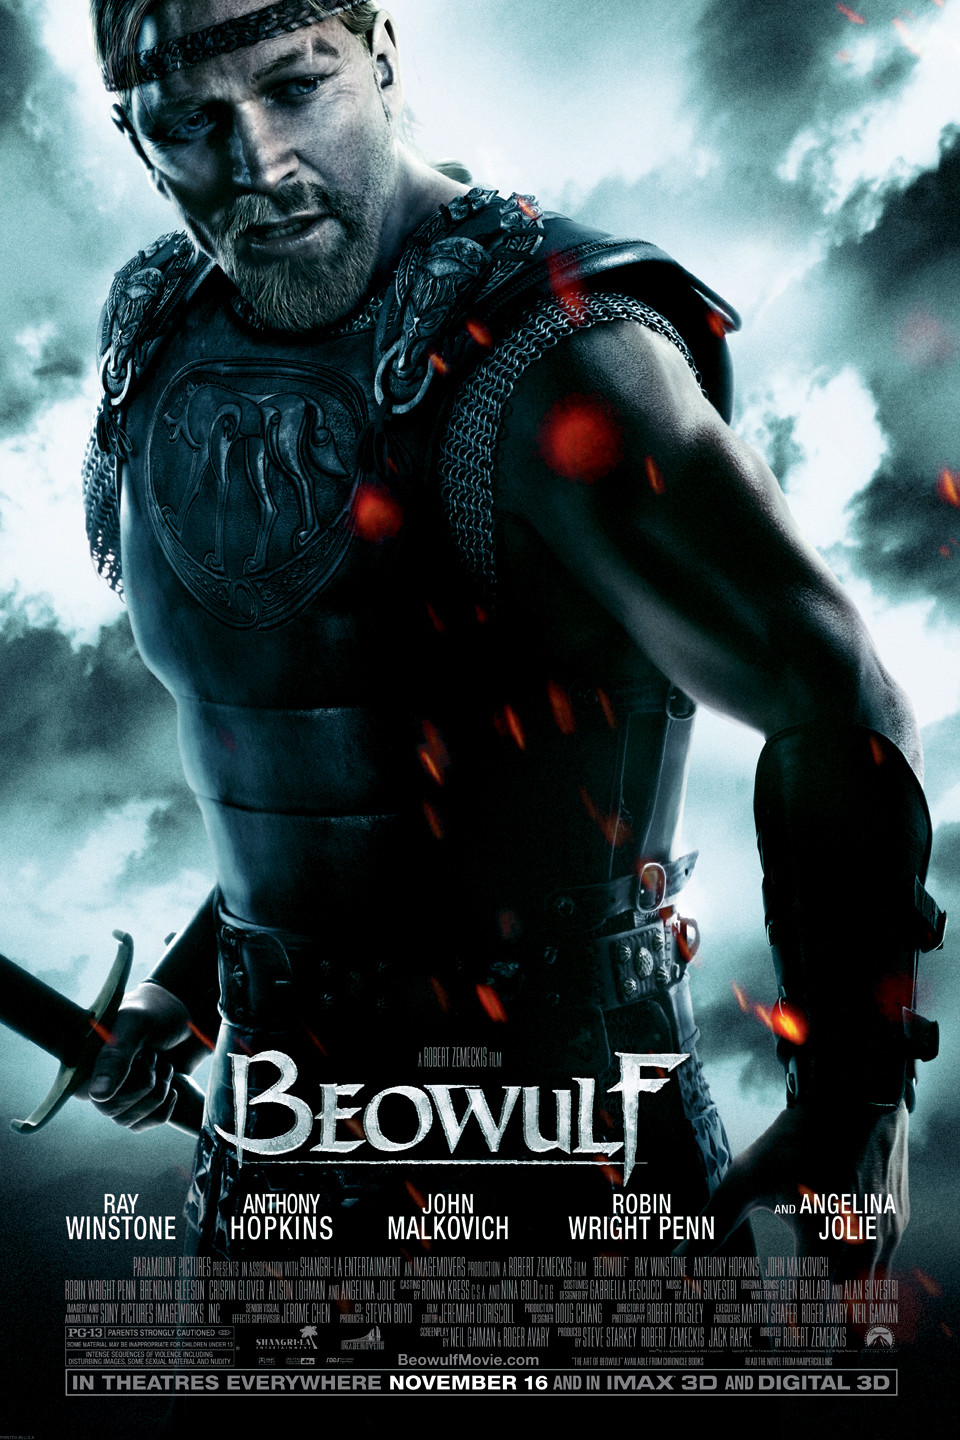 beowulf riches